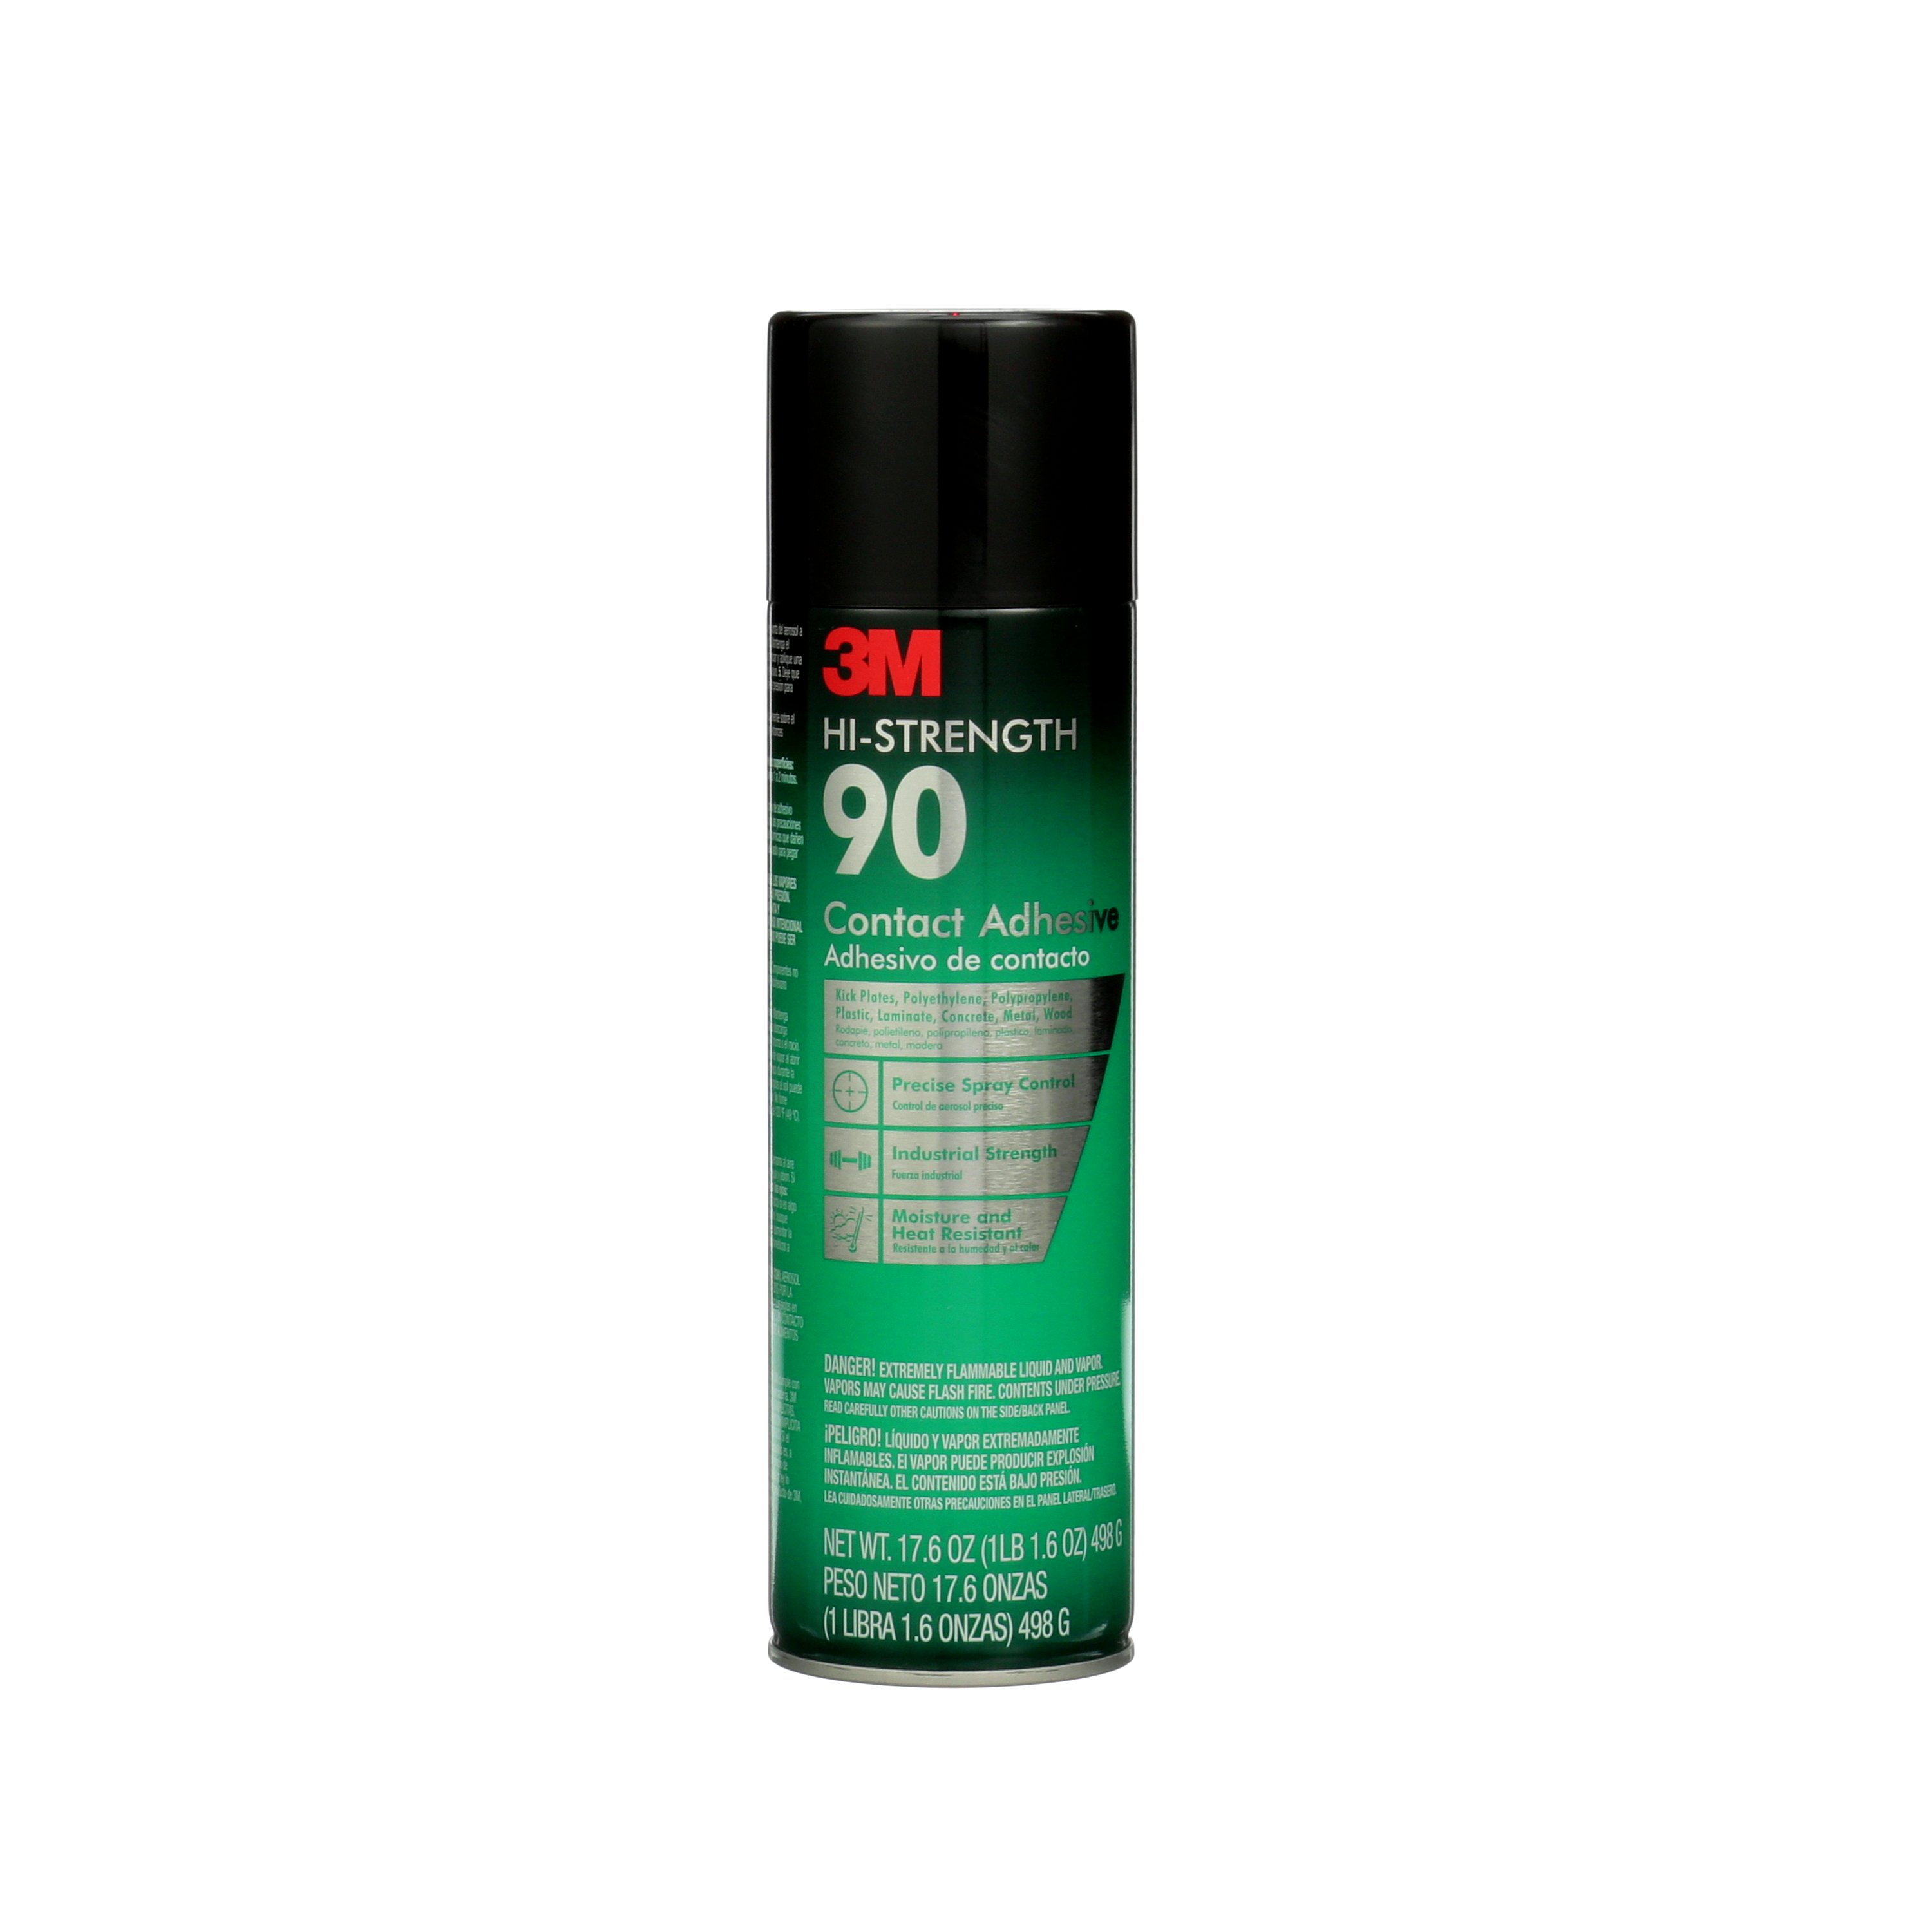 3M Hi-Strength 90 Contact Spray Adhesive, 17.6 oz, 1 Can - image 1 of 10